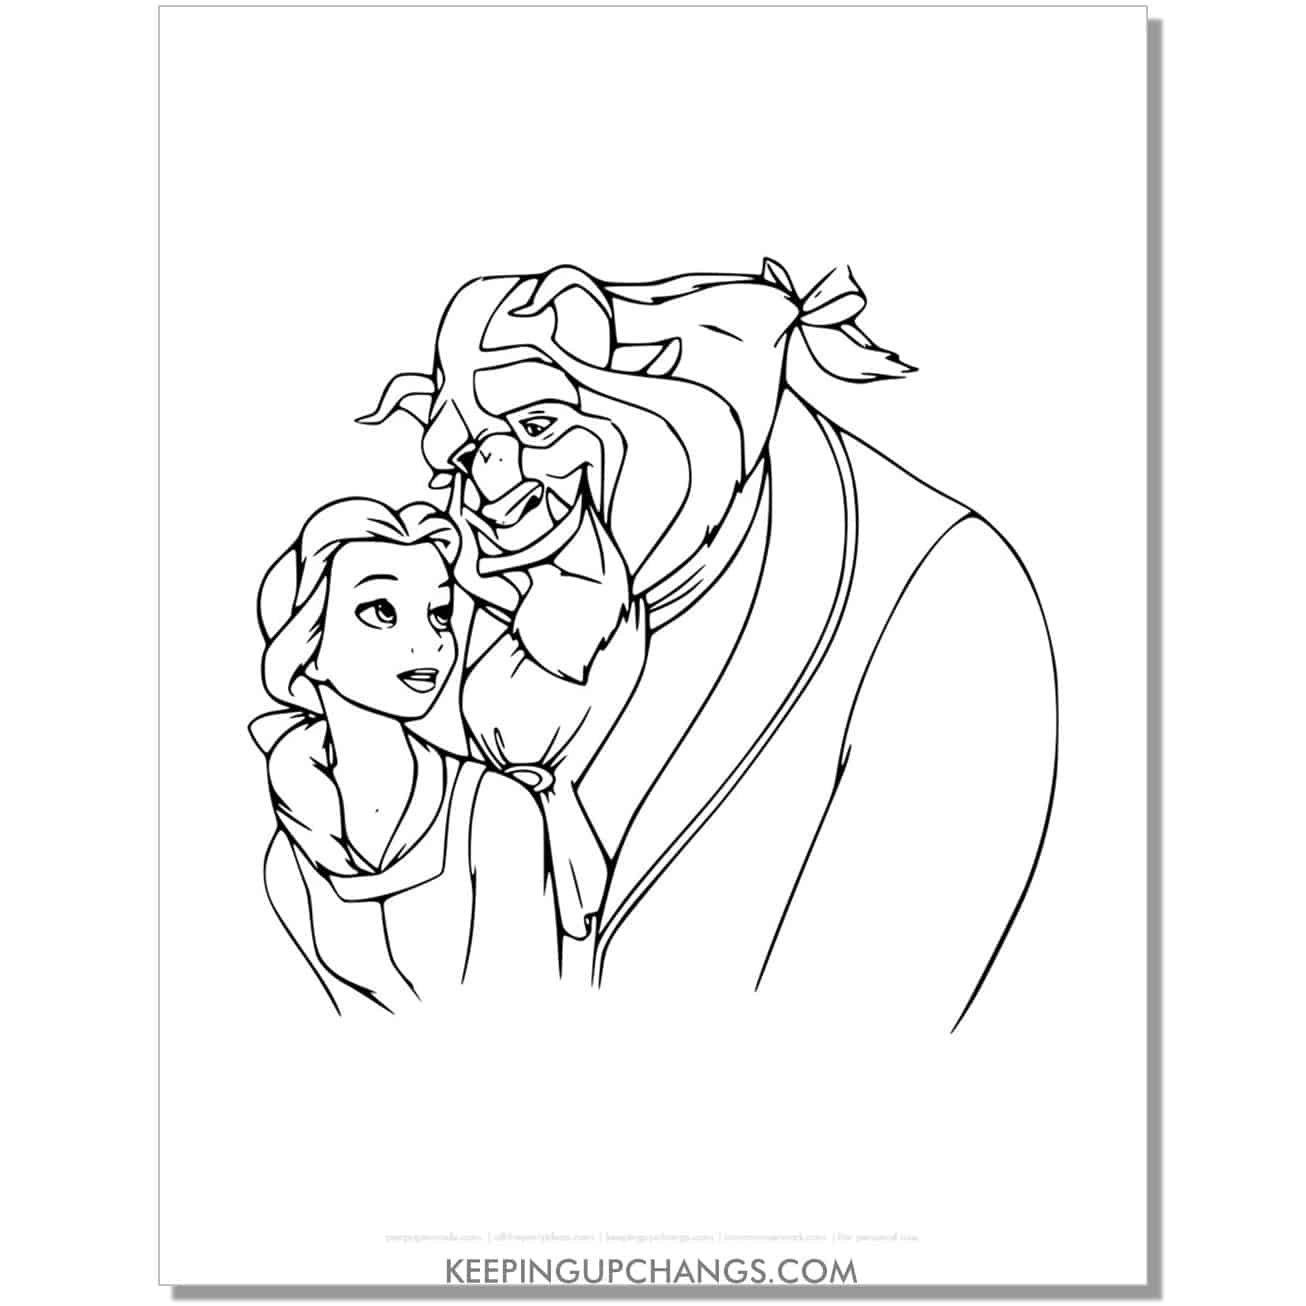 beauty and beast look into each other's eyes coloring page, sheet.